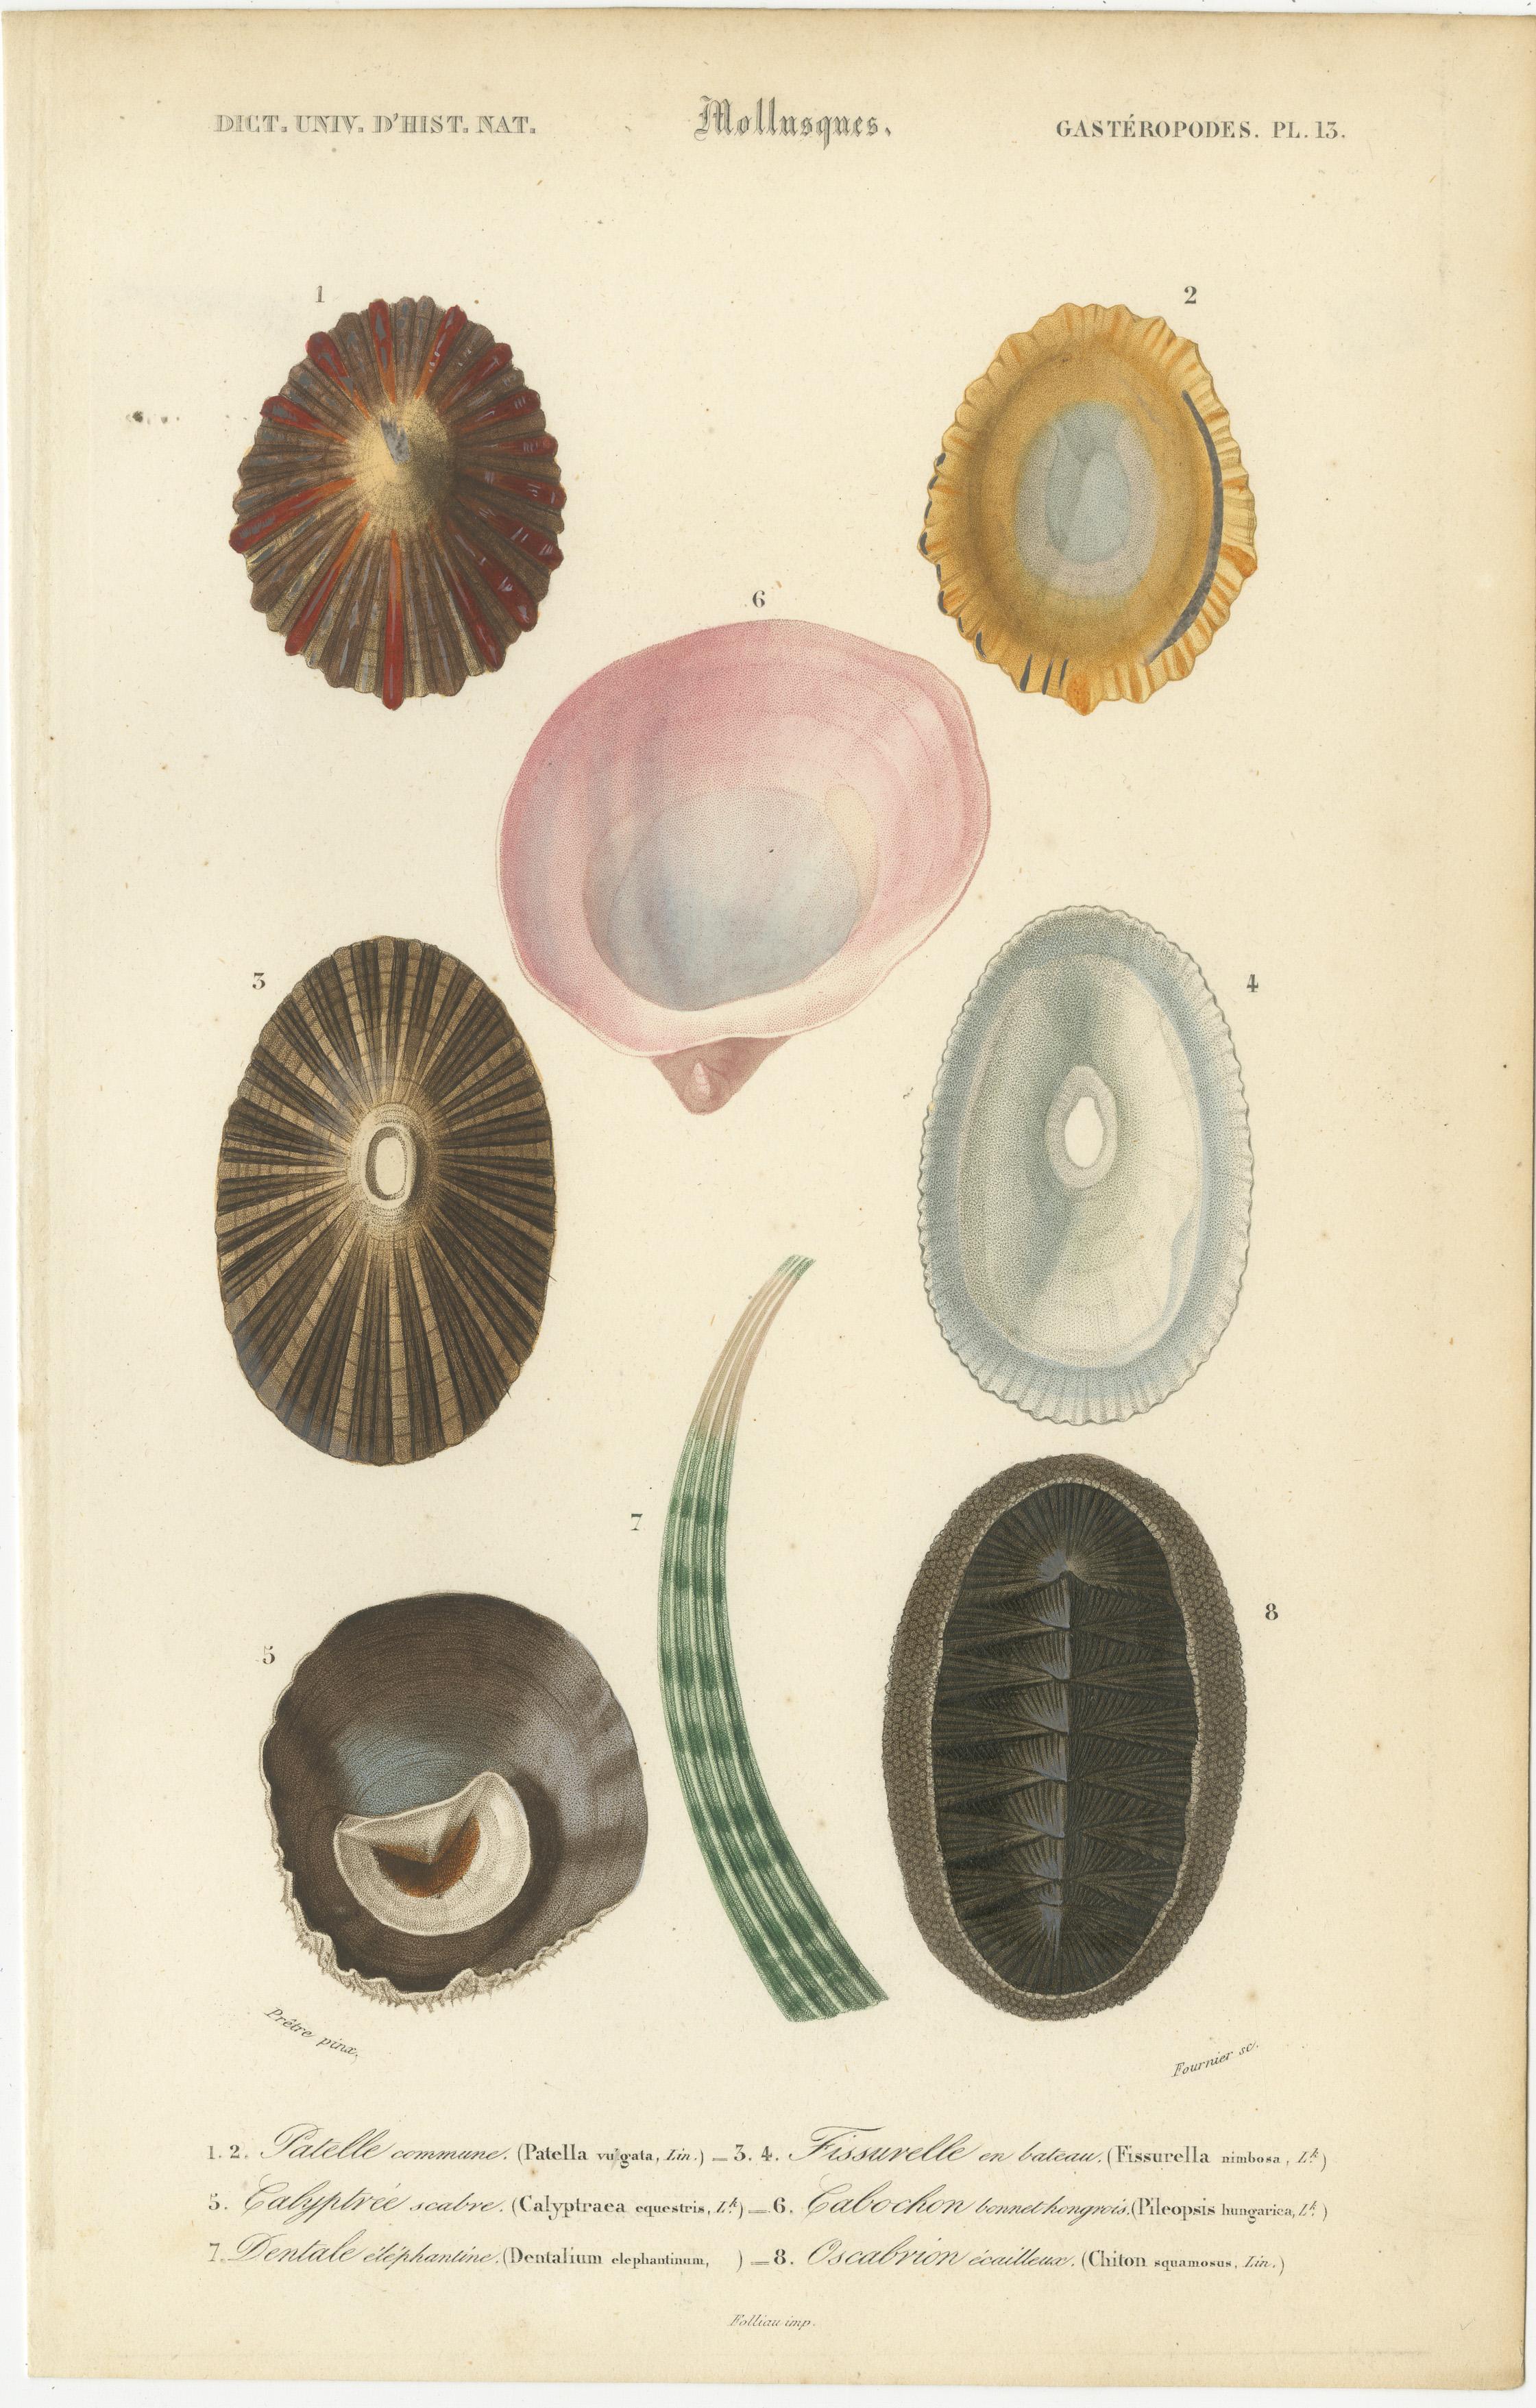 A pair of original atnique hand-colored engravings or lithographs depicting various mollusk species. They are from a work by the notable figure  C. D'Orbigny's 